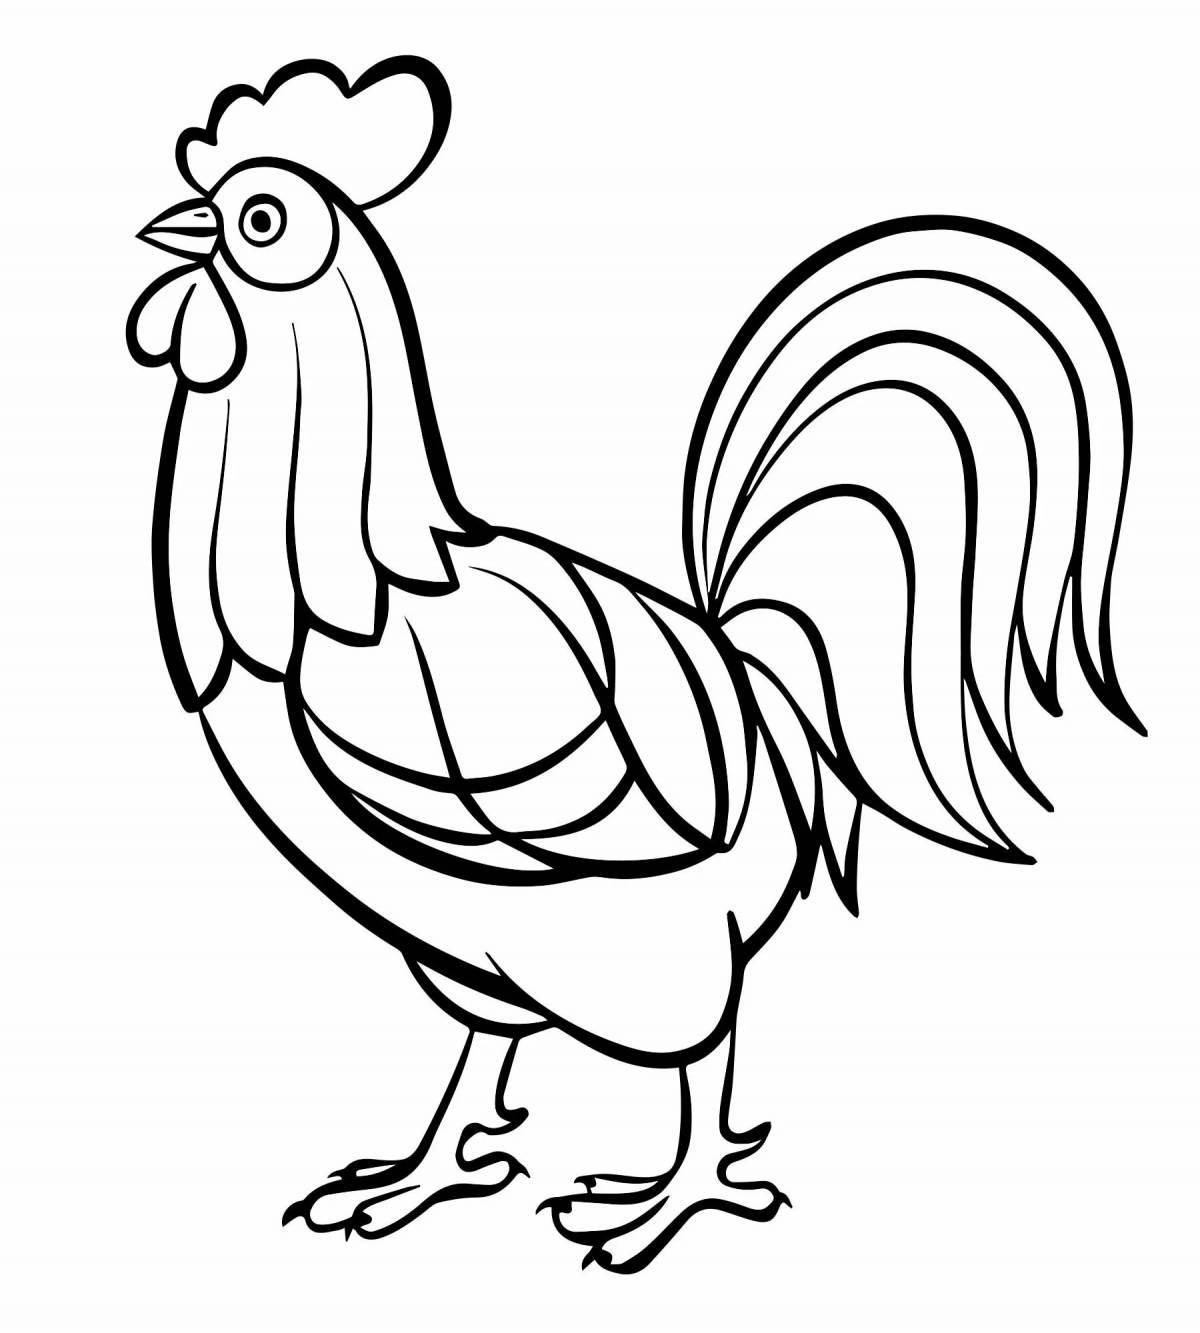 Suggestive bird coloring page for 6-7 year olds